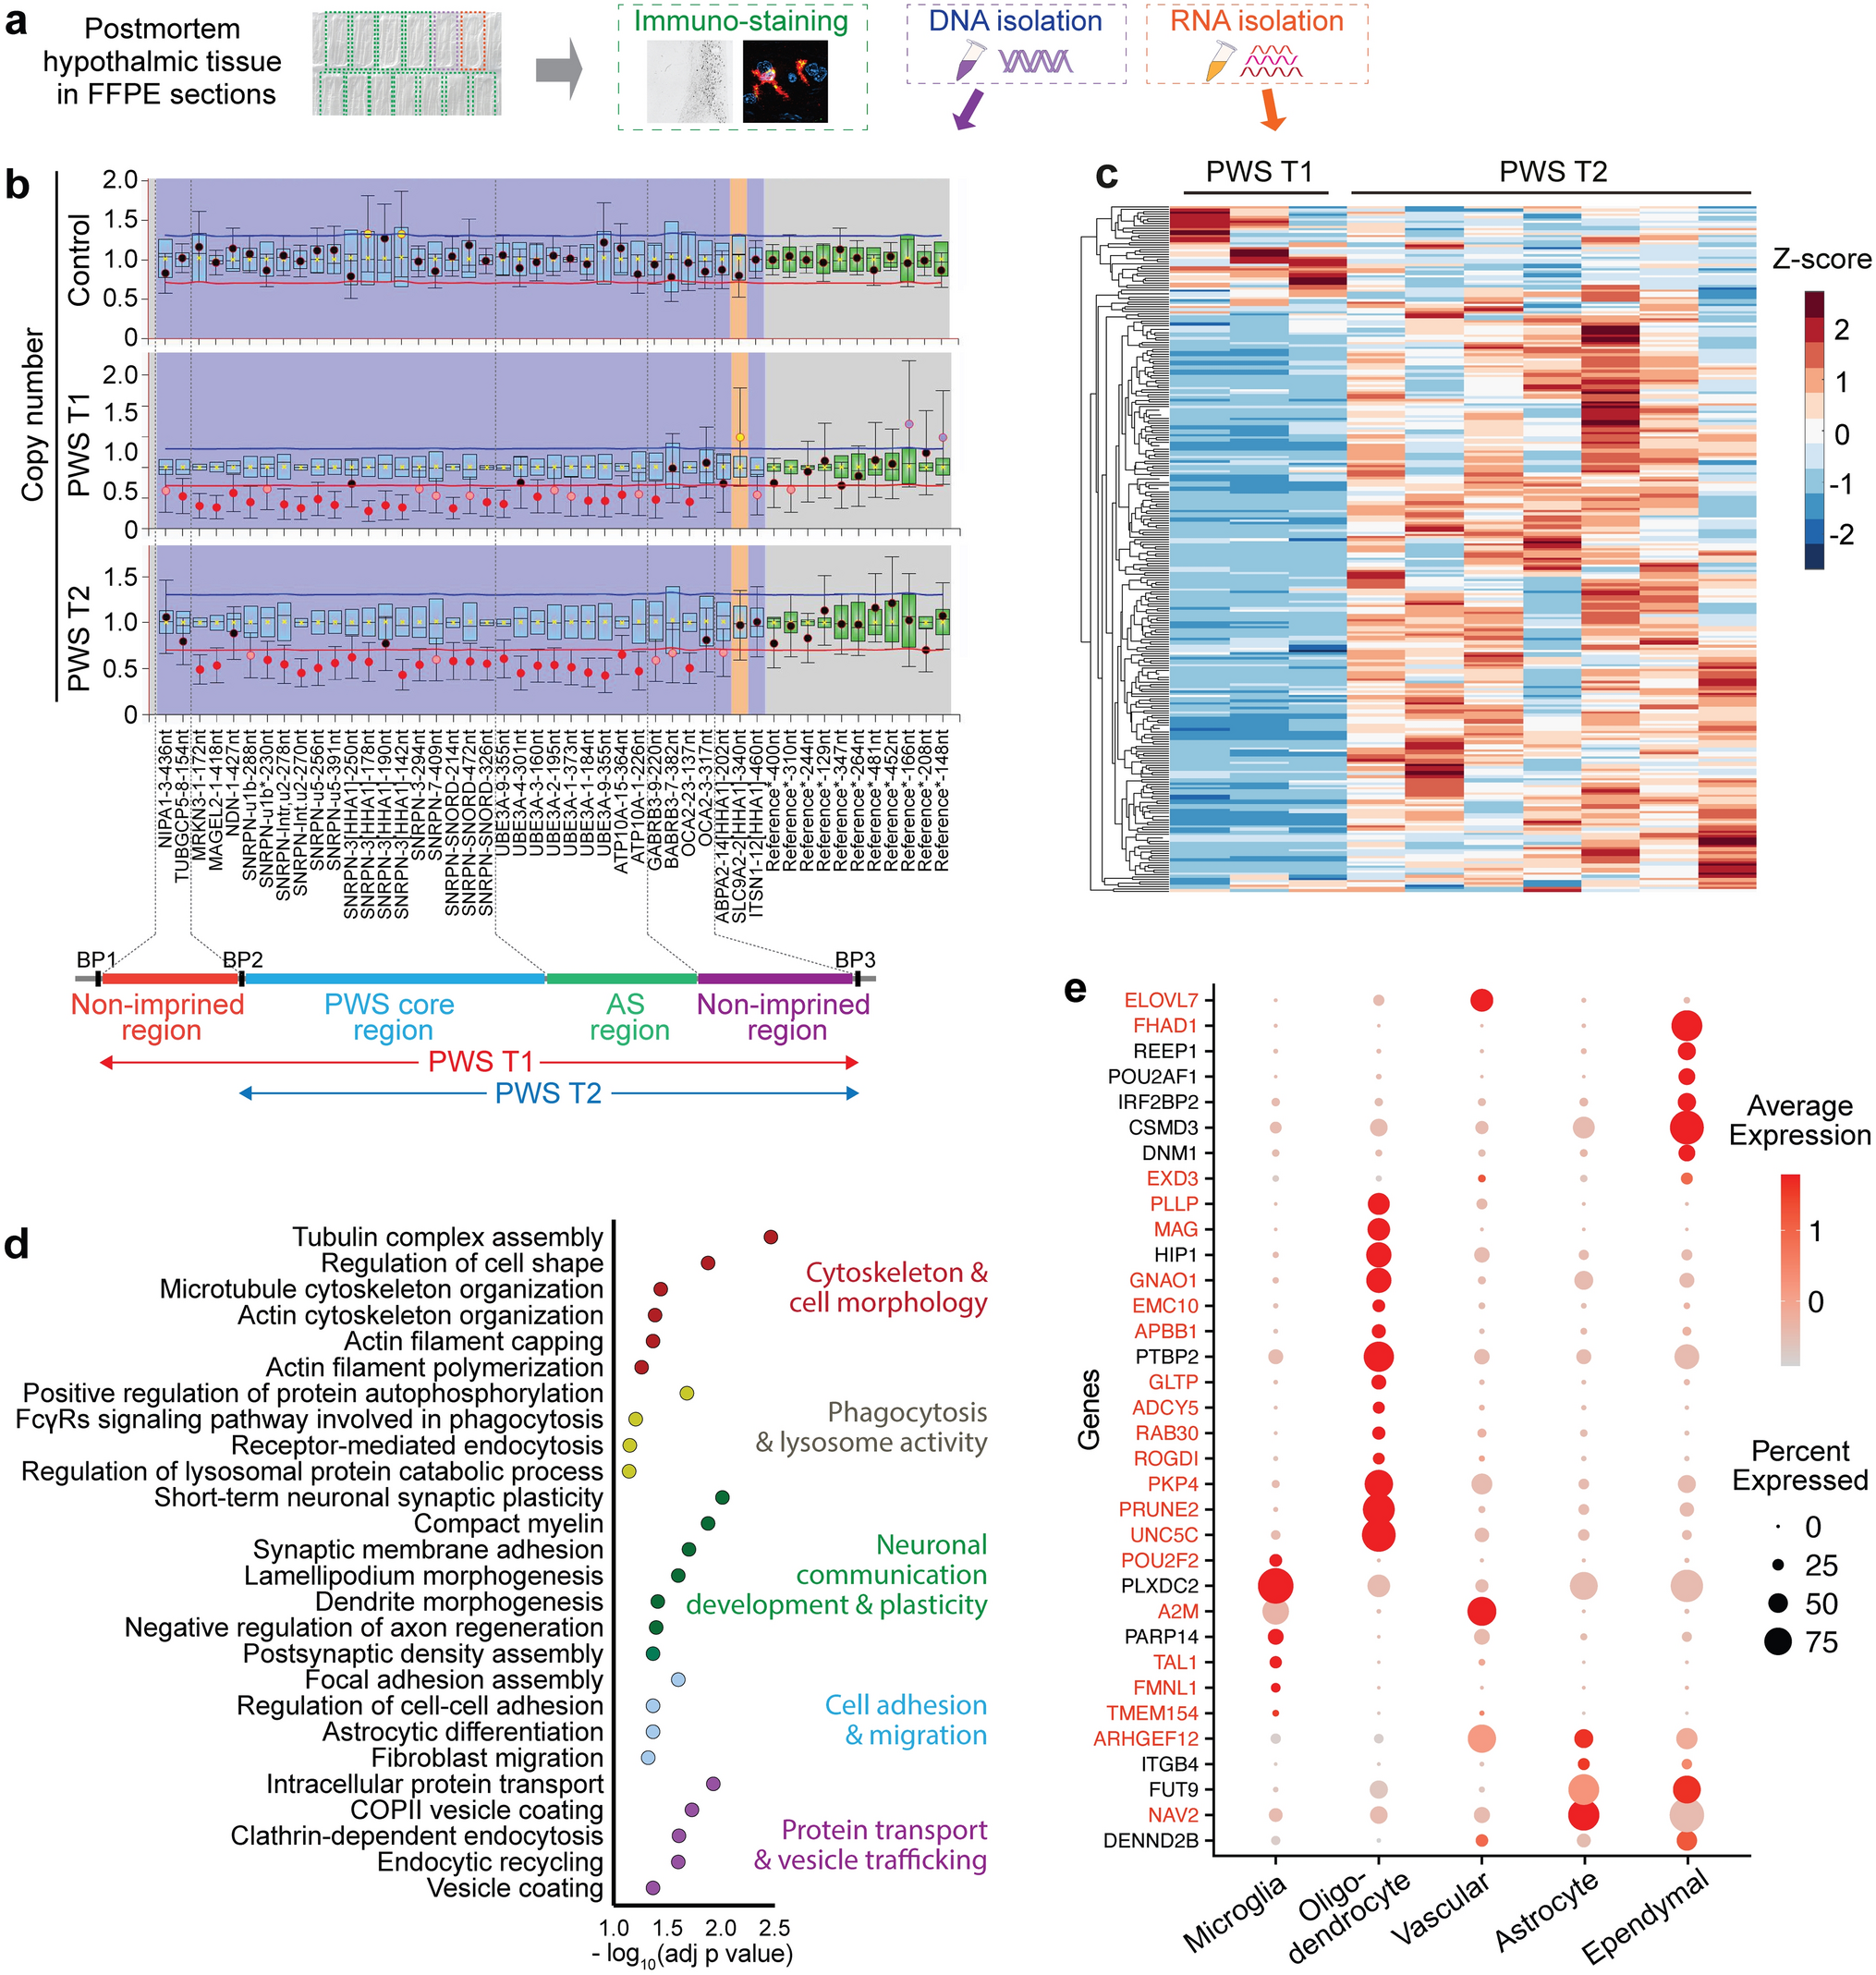 Microglial phagolysosome dysfunction and altered neural communication amplify phenotypic severity in Prader-Willi Syndrome with larger deletion